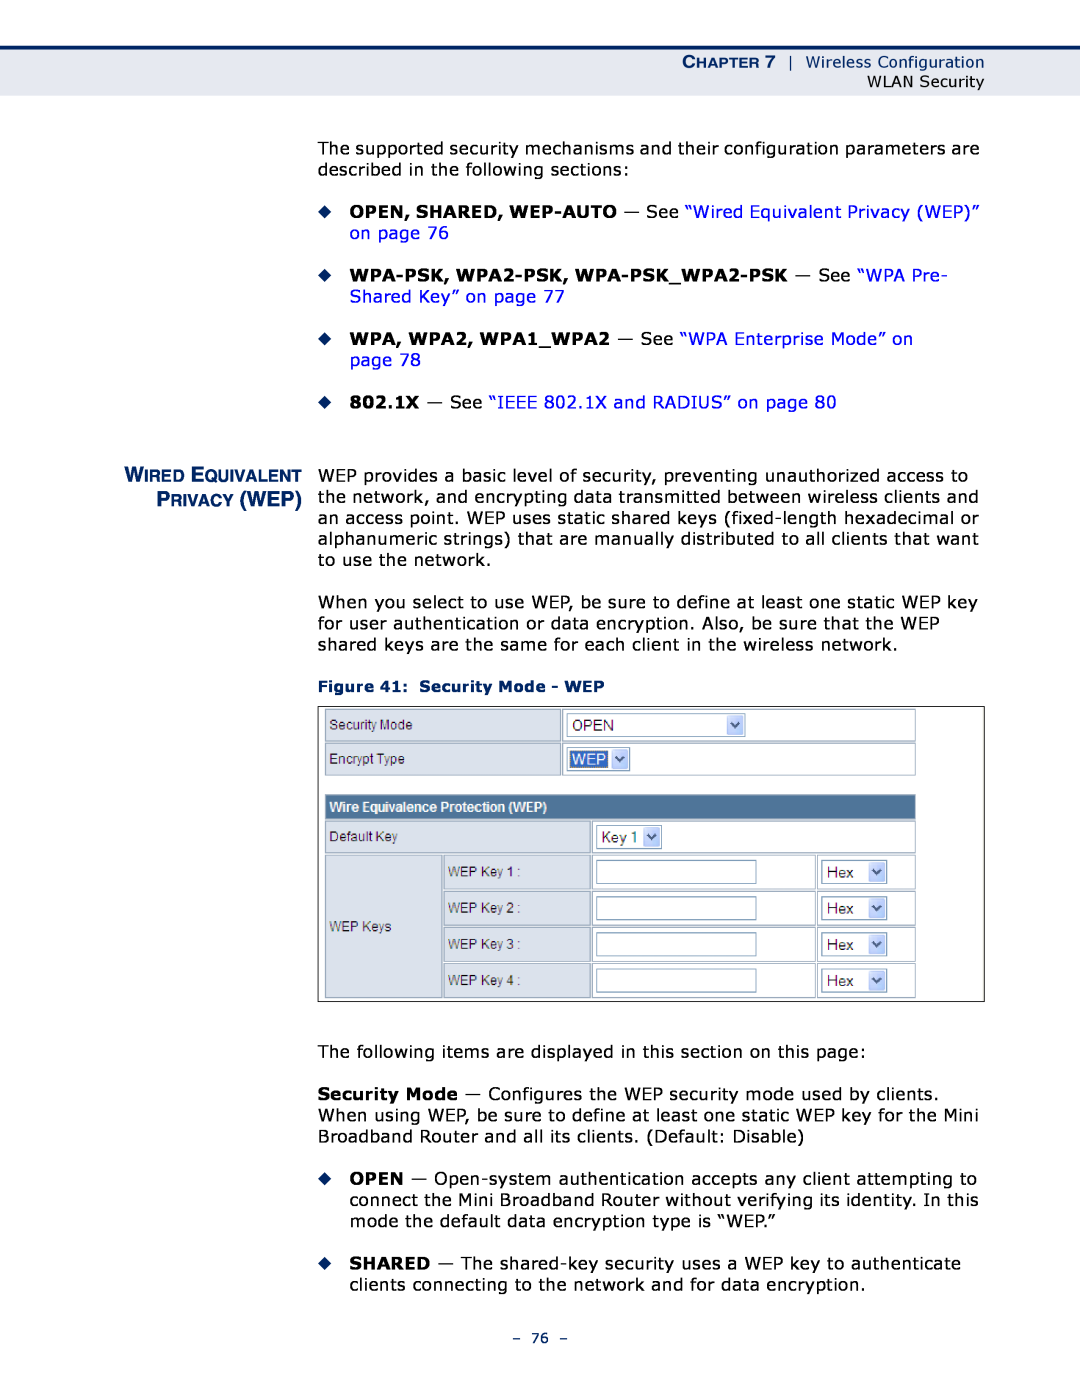 SMC Networks SMCWBR11S-N Wired Equivalent Privacy Wep, OPEN, SHARED, WEP-AUTO - See “Wired Equivalent Privacy WEP” on page 